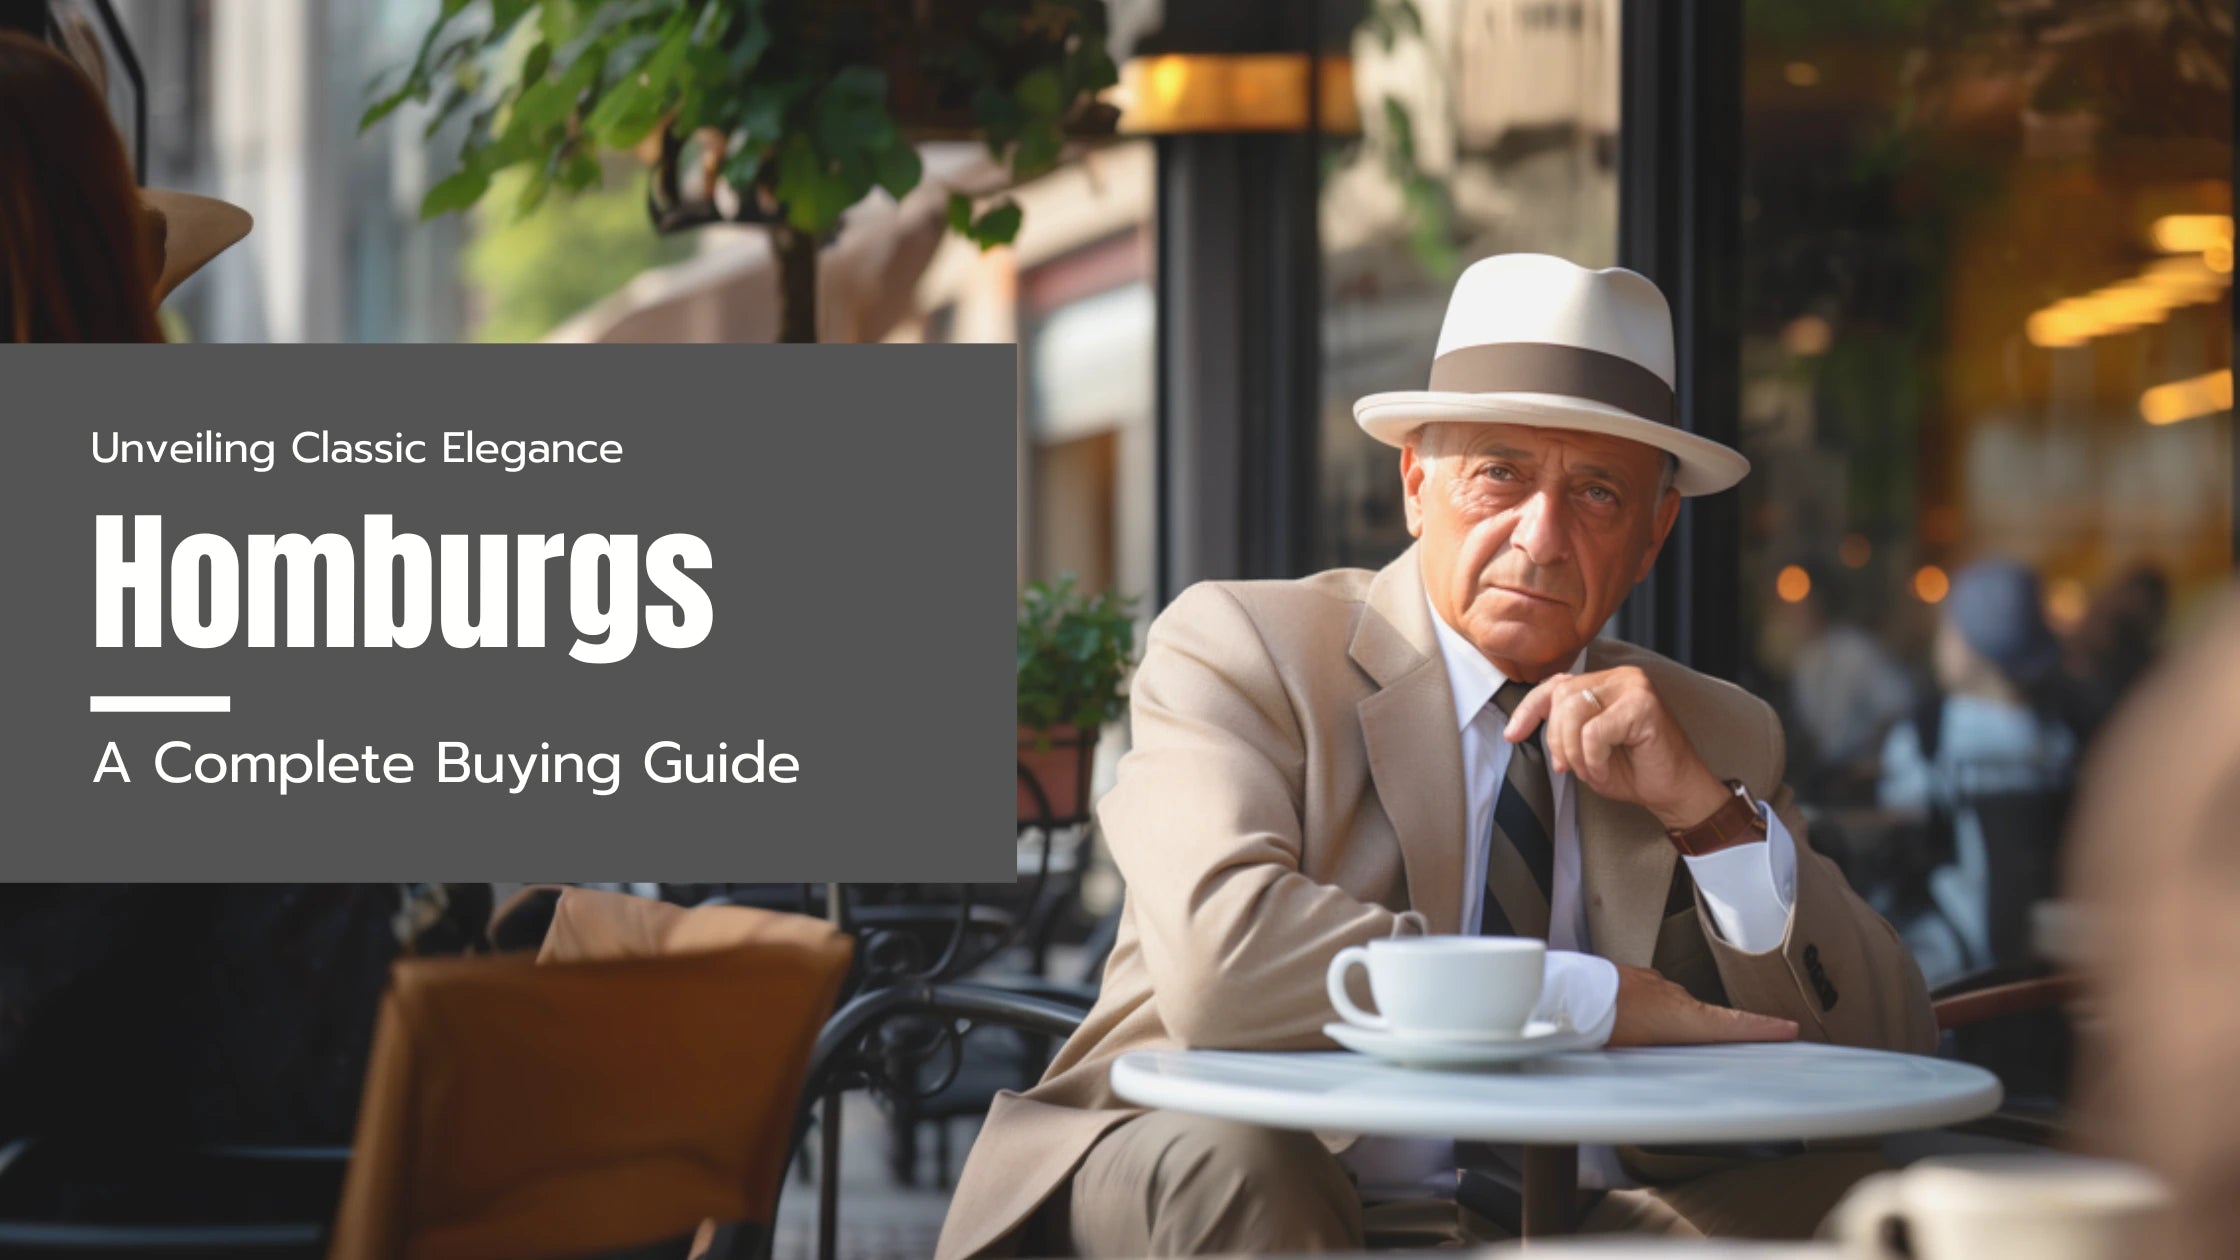 Elegant gentleman in a beige suit and white Homburg hat, seated at an outdoor café, with the title 'Unveiling Classic Elegance - Homburgs: A Complete Buying Guide' prominently displayed.